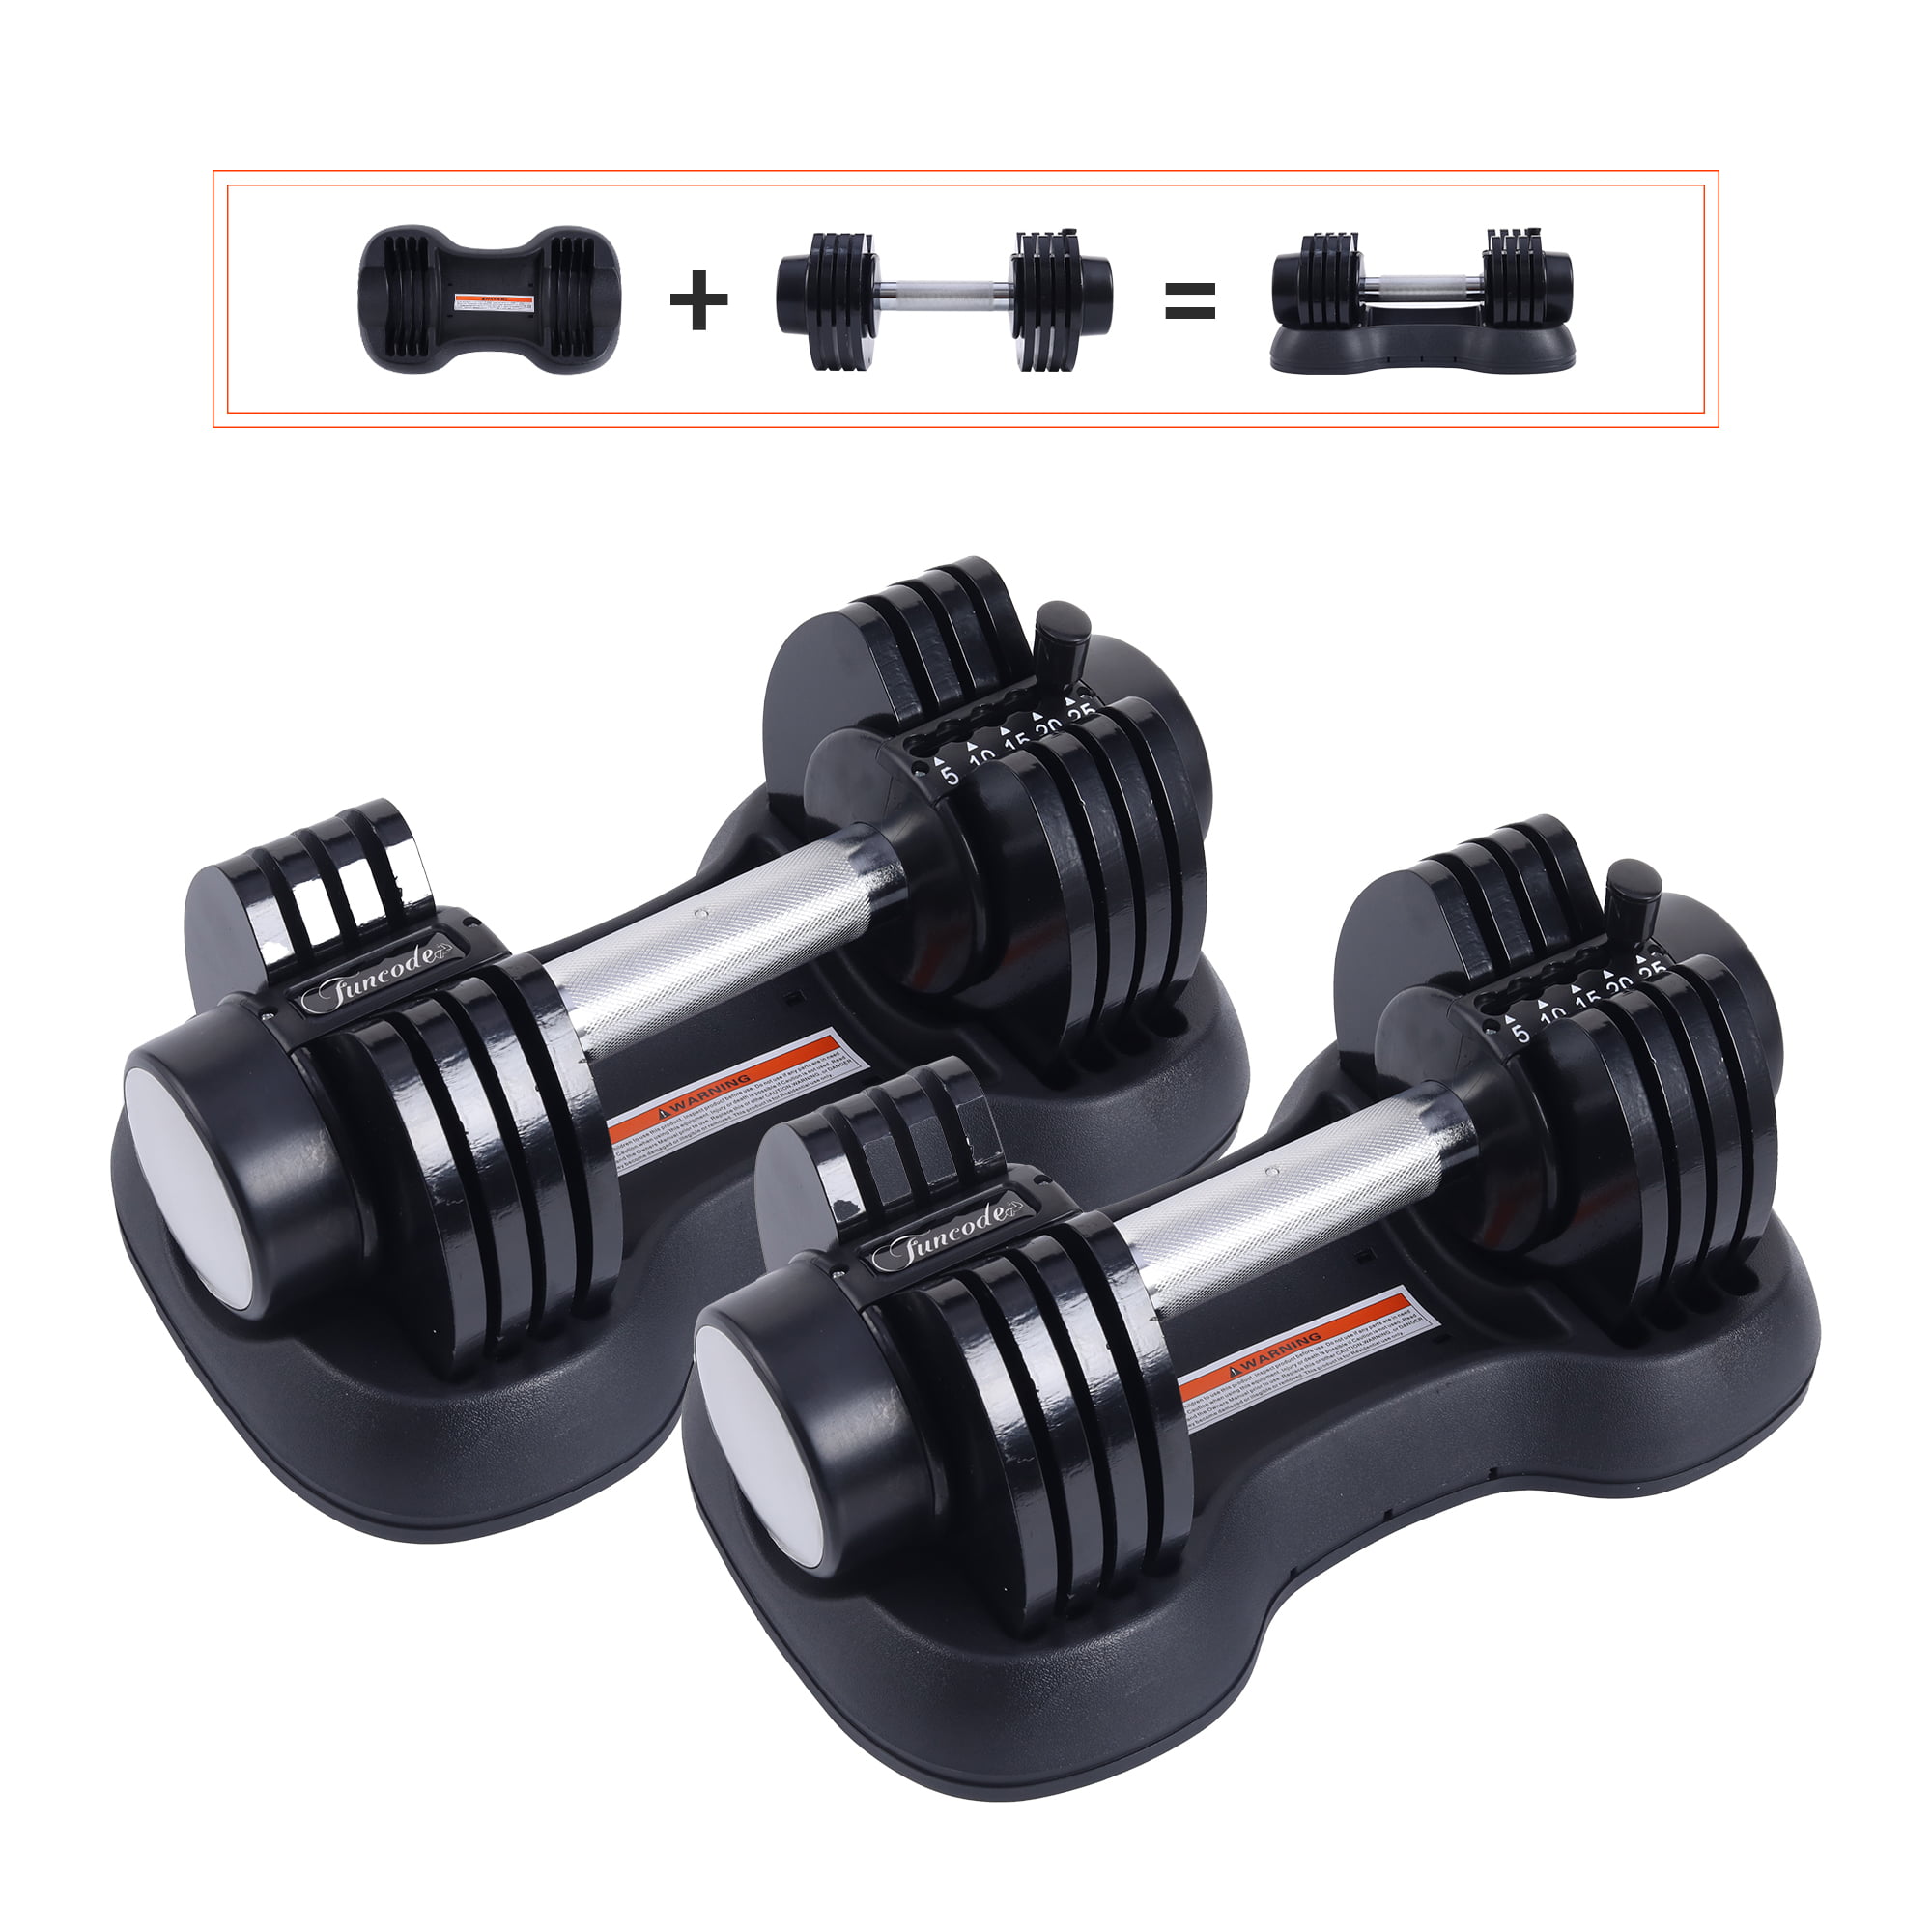 Easy Assembly and Save Space Workout Strength Training Fitness Weight Home Gym. Neoprene Anti-Slip Handle Funcode Adjustable Dumbbell Barbell 2 in 1